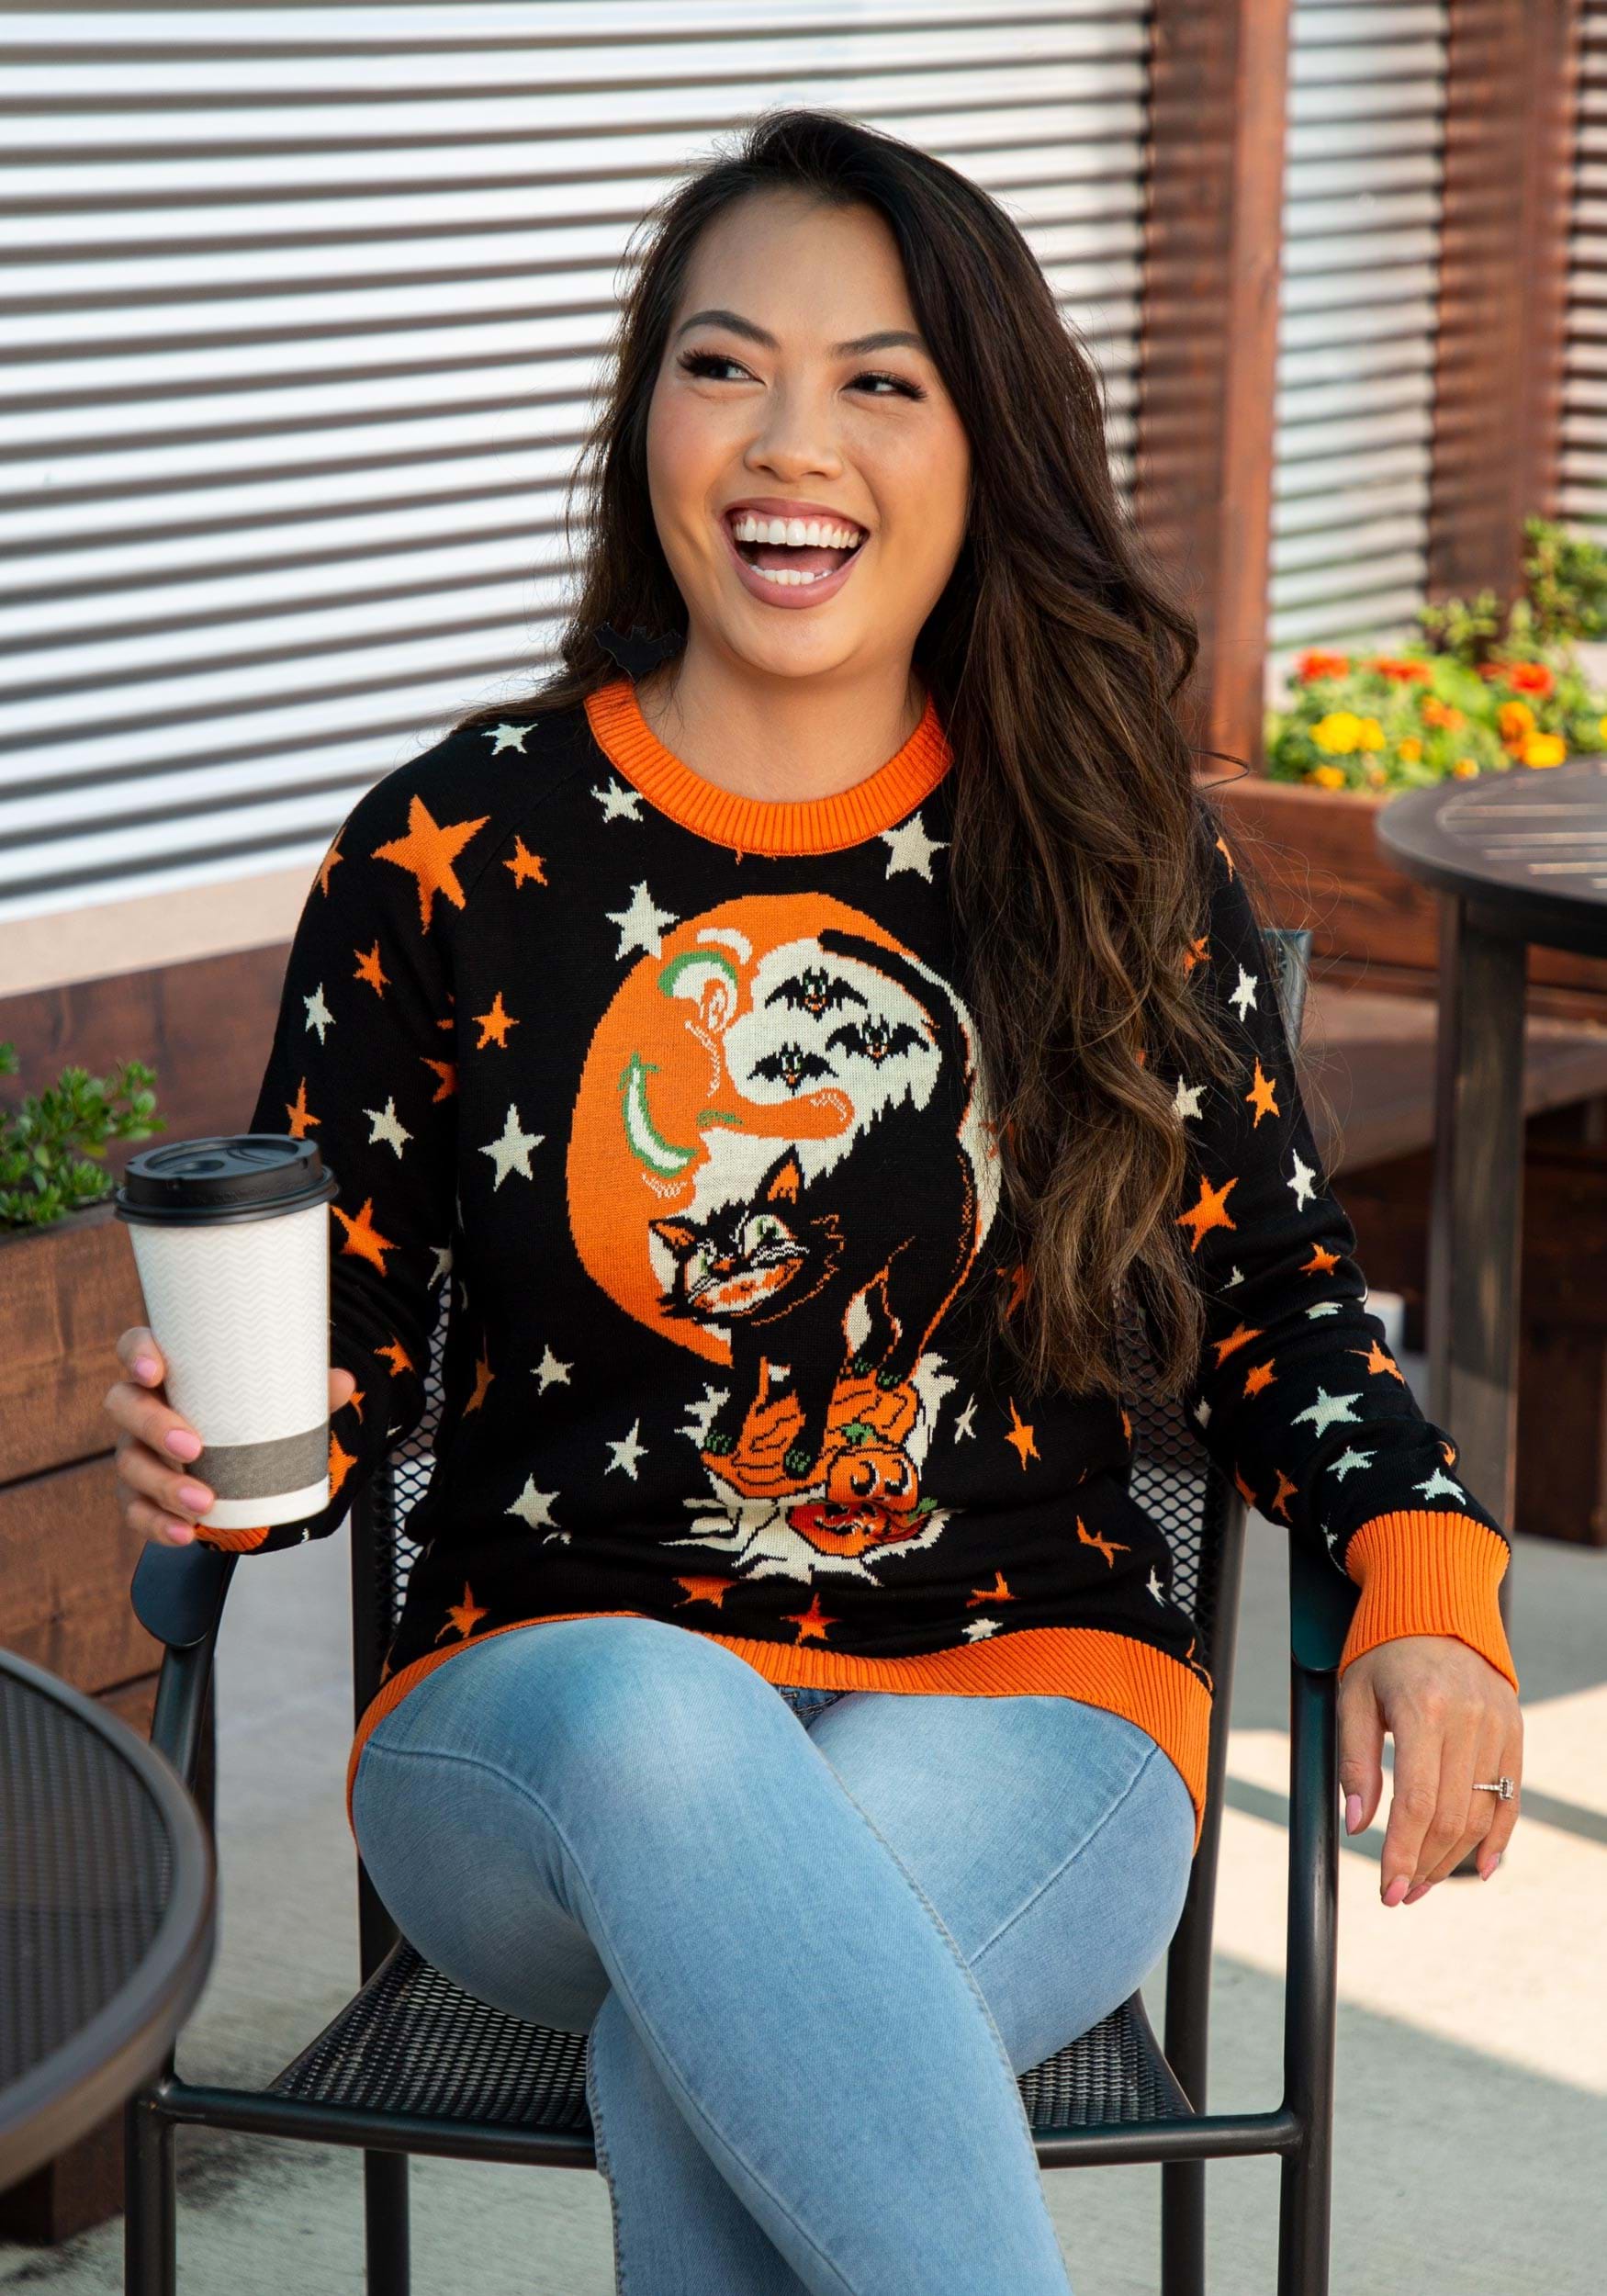 Halloween gag gifts for women #3: Halloween sweaters & costumes